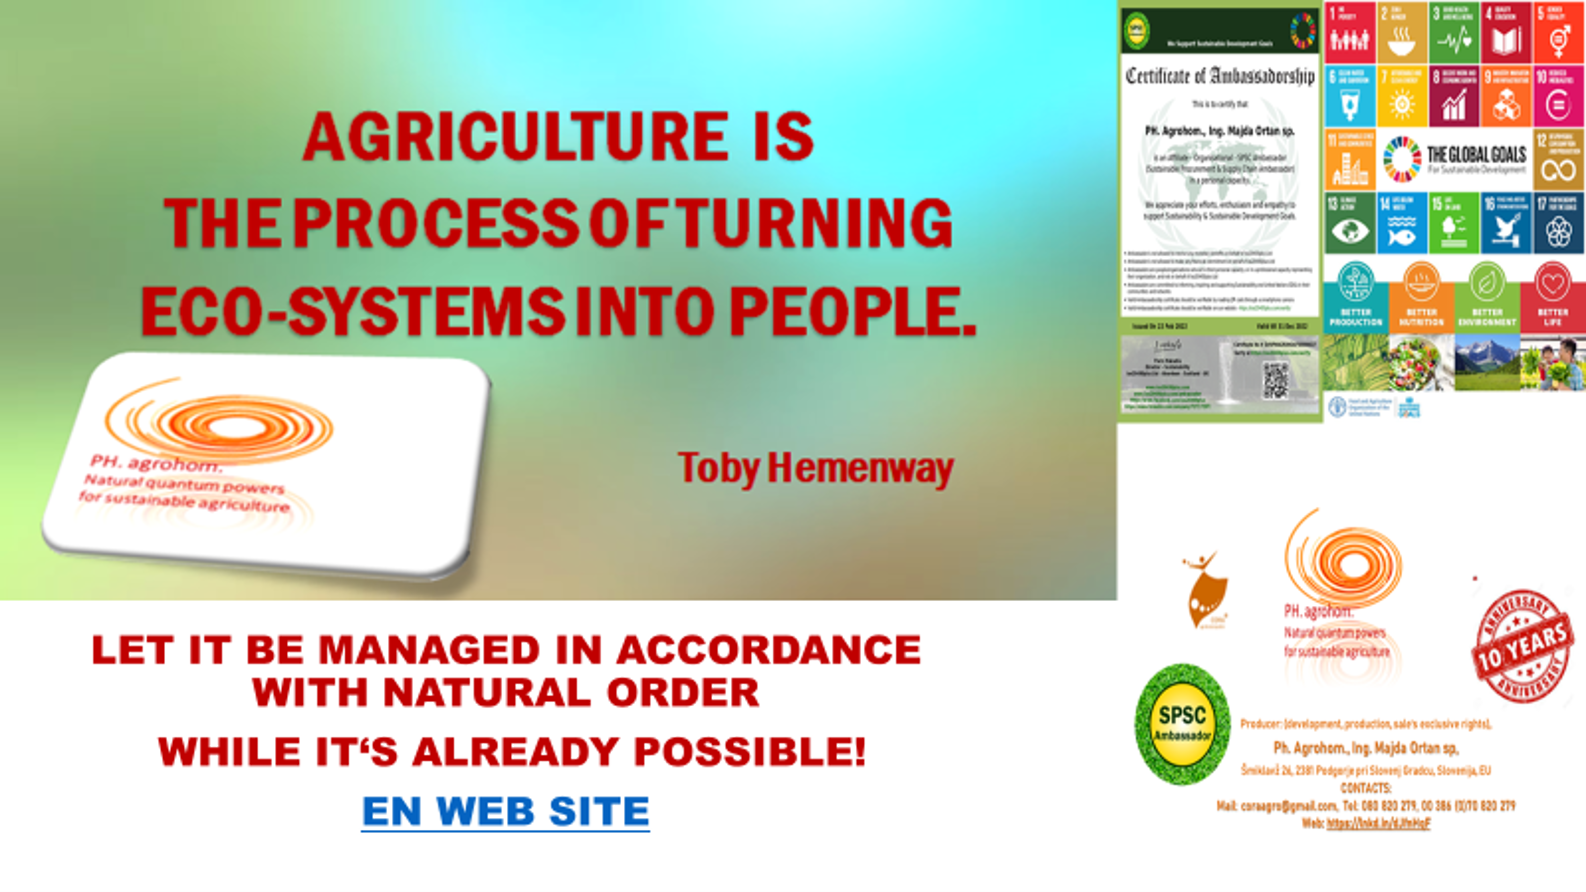 Agriculture is turning eco systems into people. Let it be managed in Accordance with Natural Order while it is already possible. www.cora agrohomeopathie.com  - AGRO-HOMEO-DYNAMIC PRINCIPLES OF operating mode OF ENERGIZED NATURAL PRODUCTS Cora agrohomeopathie®, which at the frequency level of the Natural Order of virgin ecosystems replace pesticides, regenerate tired, used out cultivated areas